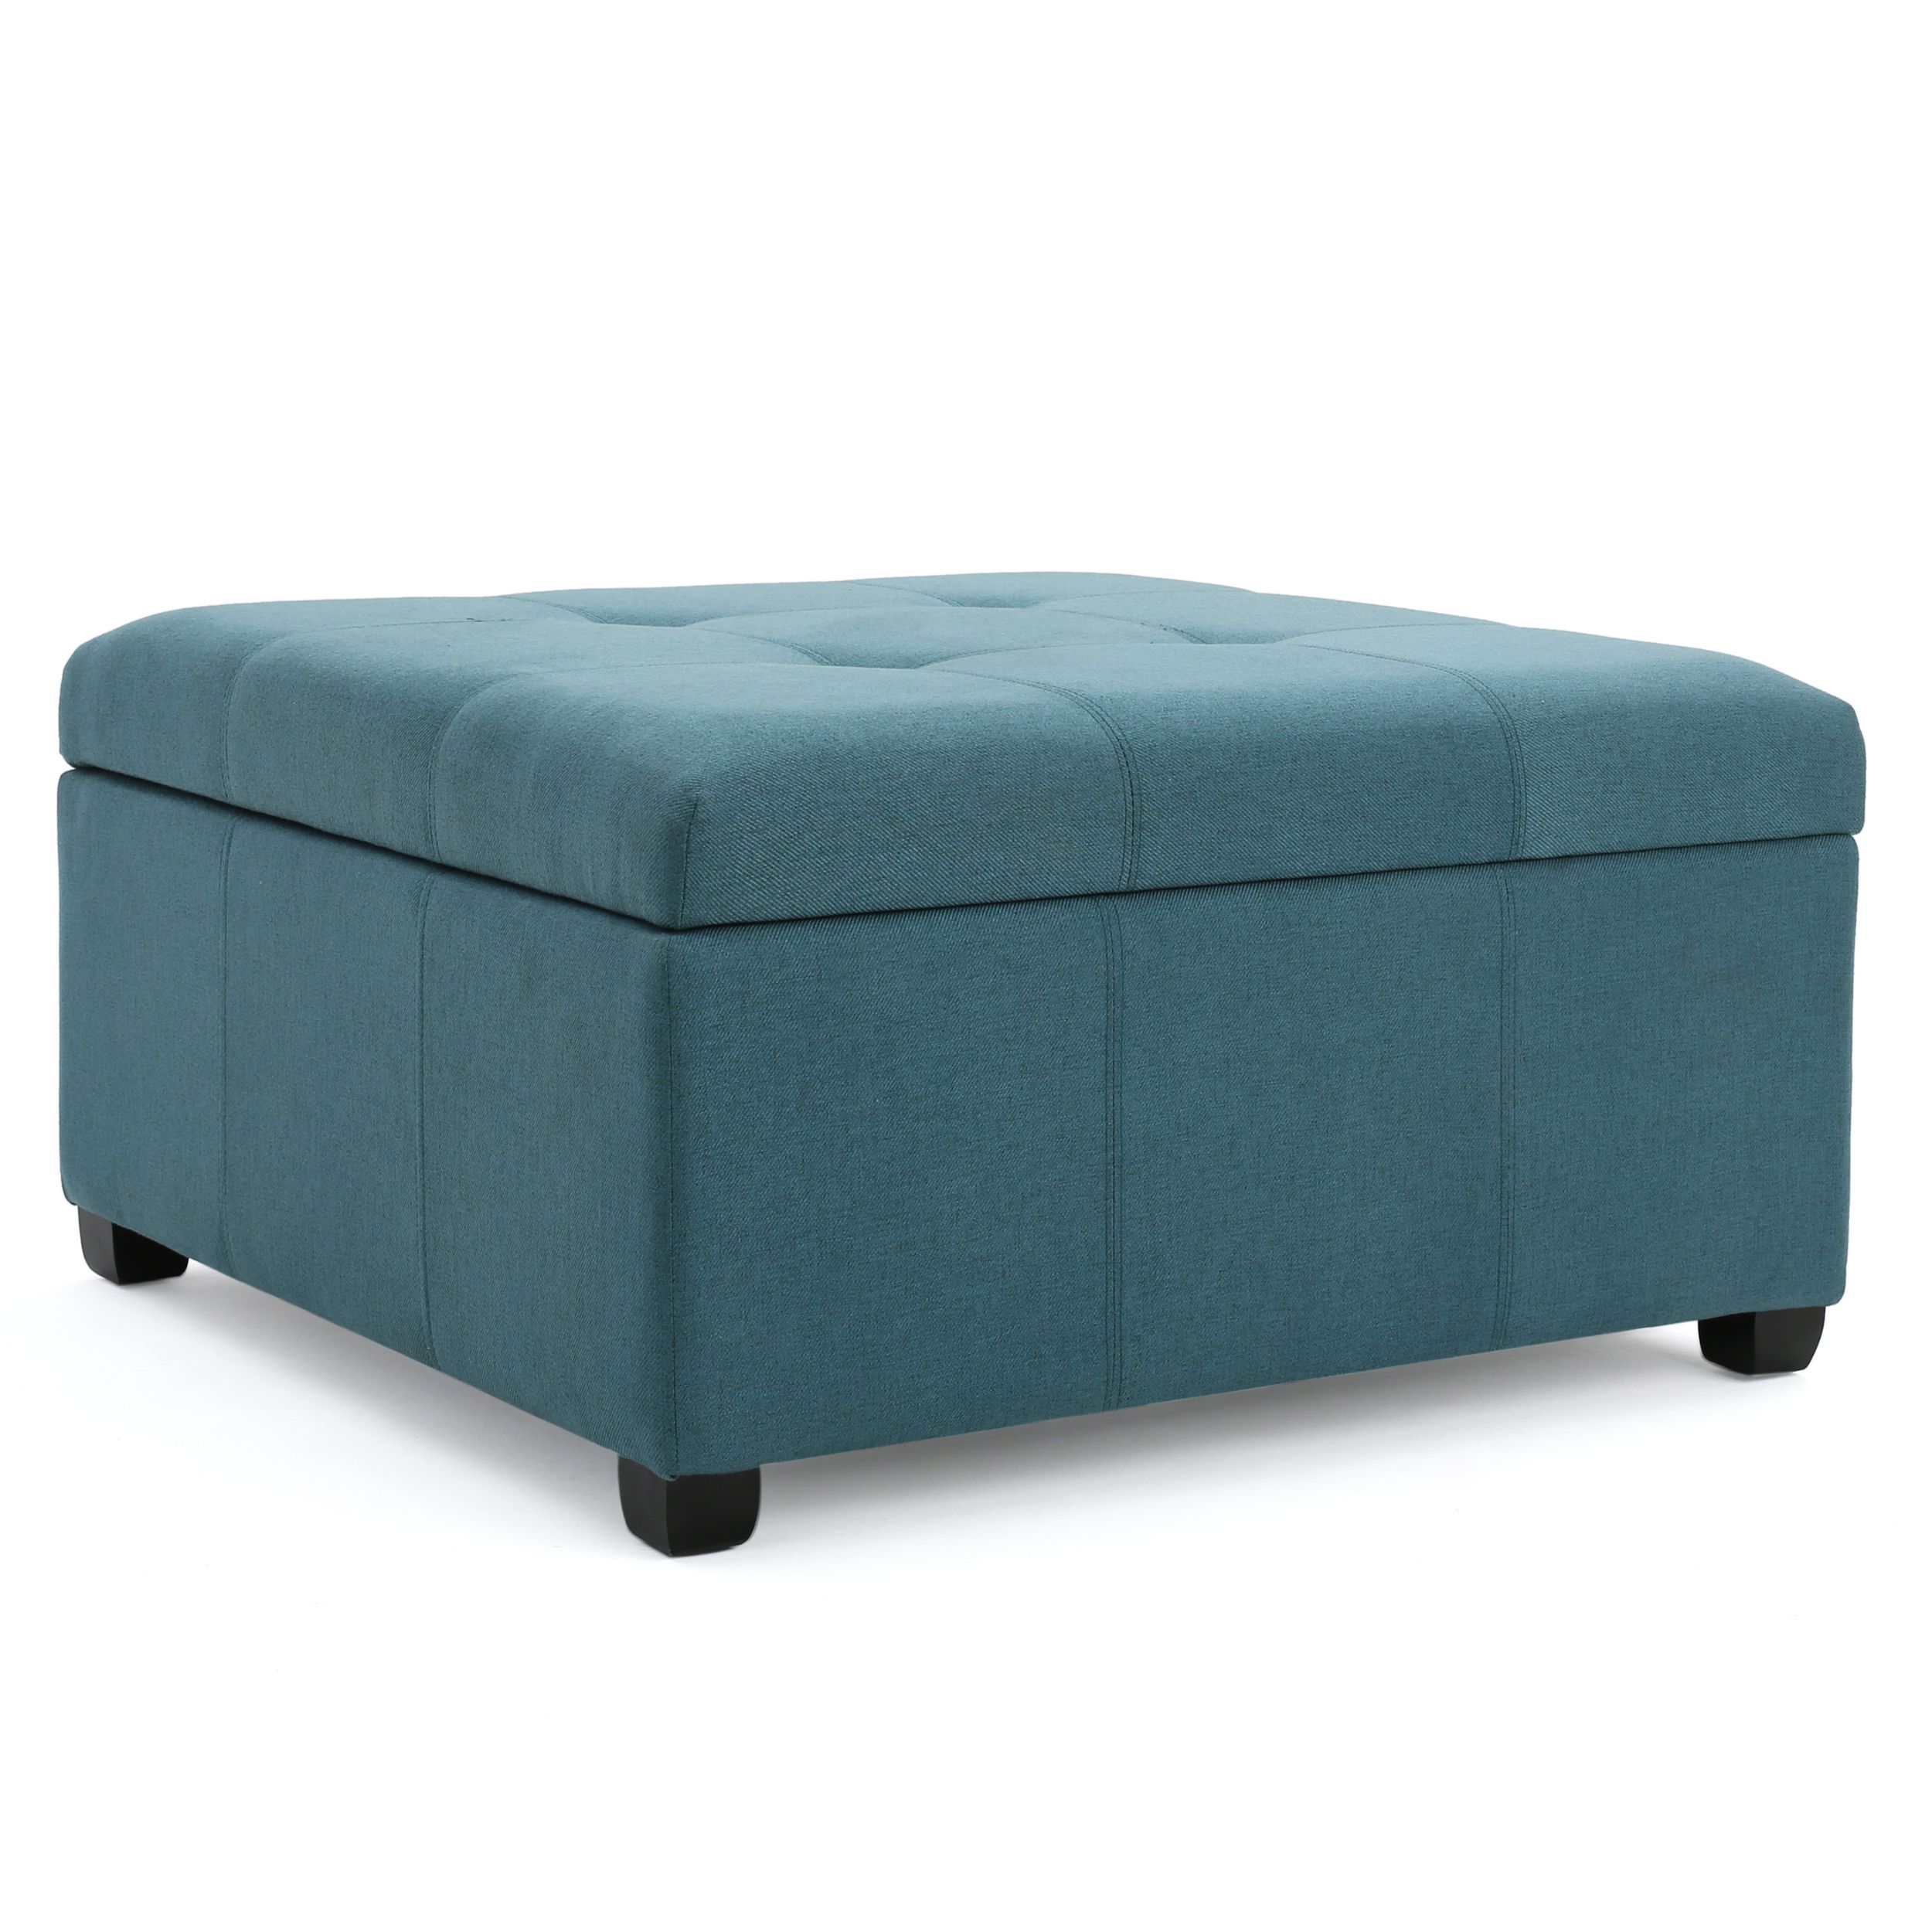 Fabric Storage Ottomans Within Latest Carlyle Fabric Storage Ottoman, Dark Teal – Walmart – Walmart (View 10 of 10)